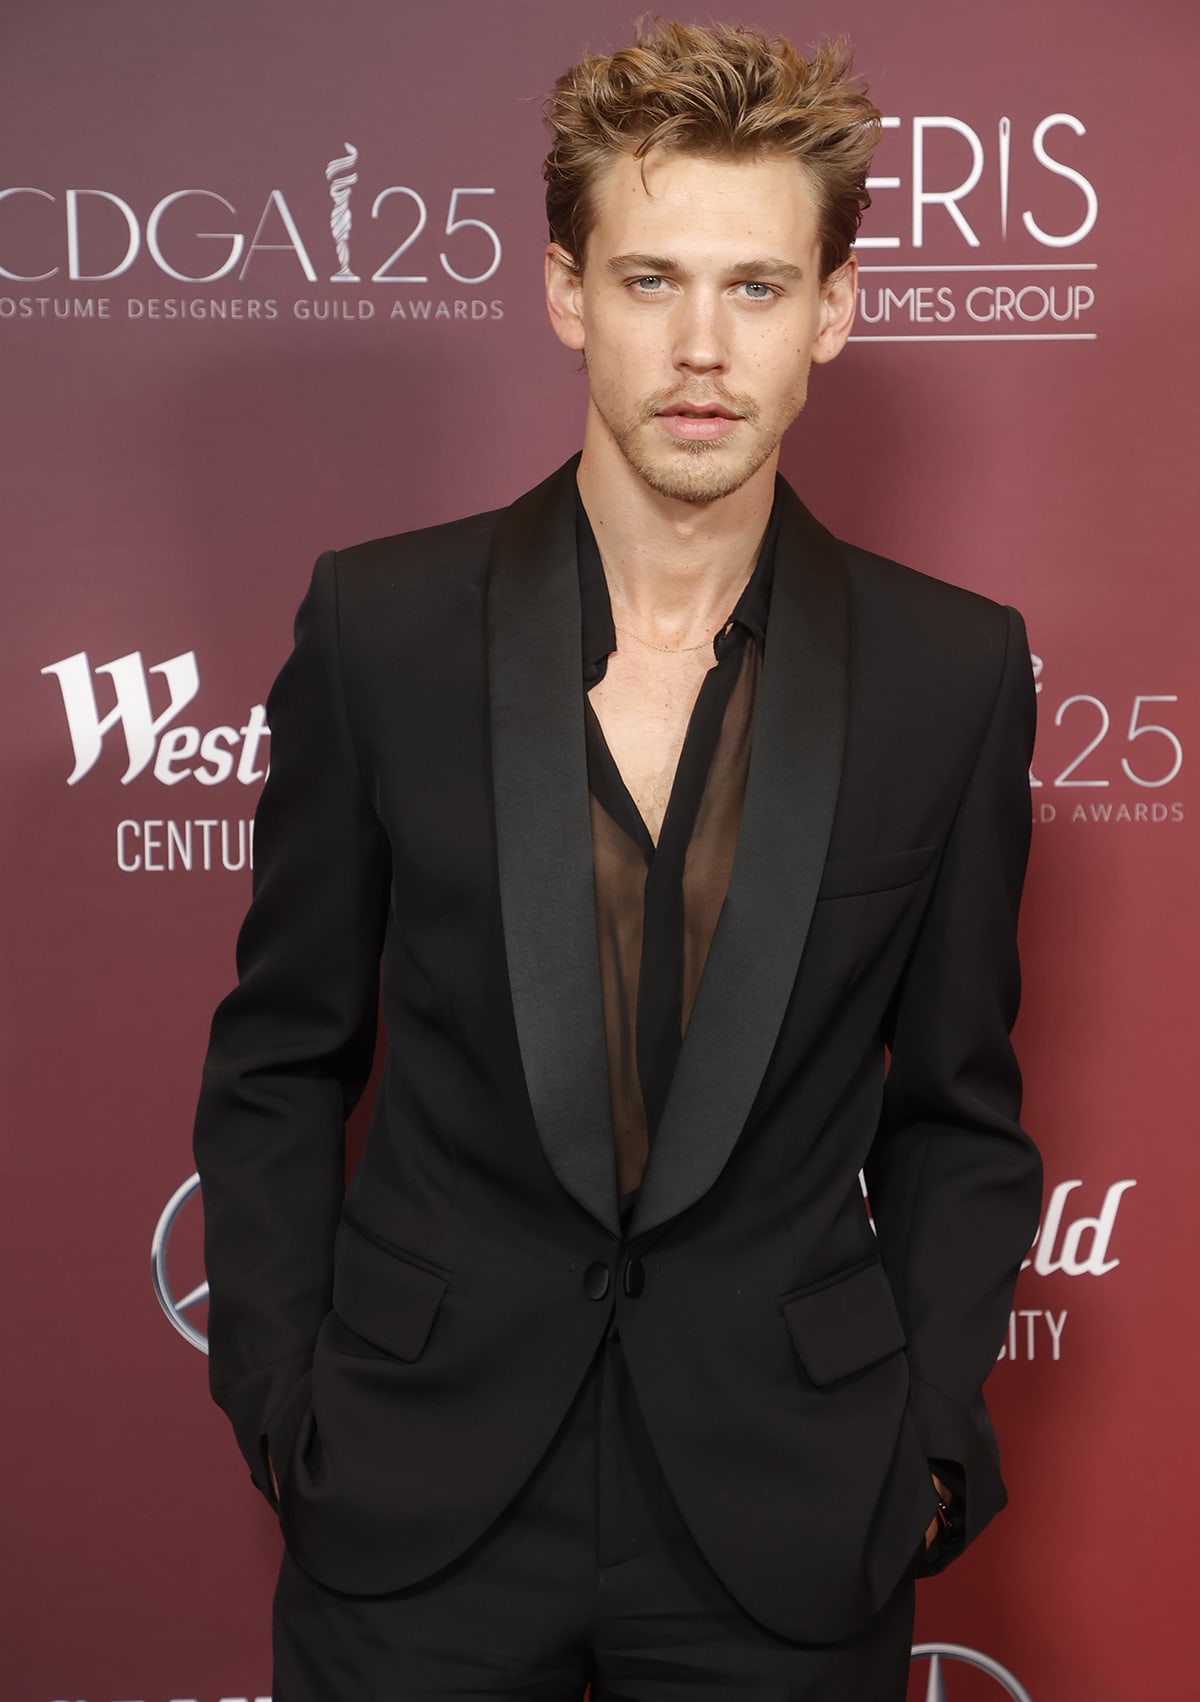 Austin Butler brings his agent James Farrell, instead of girlfriend Kaia Gerber, as his plus-one to the Vanity Fair Oscars Party